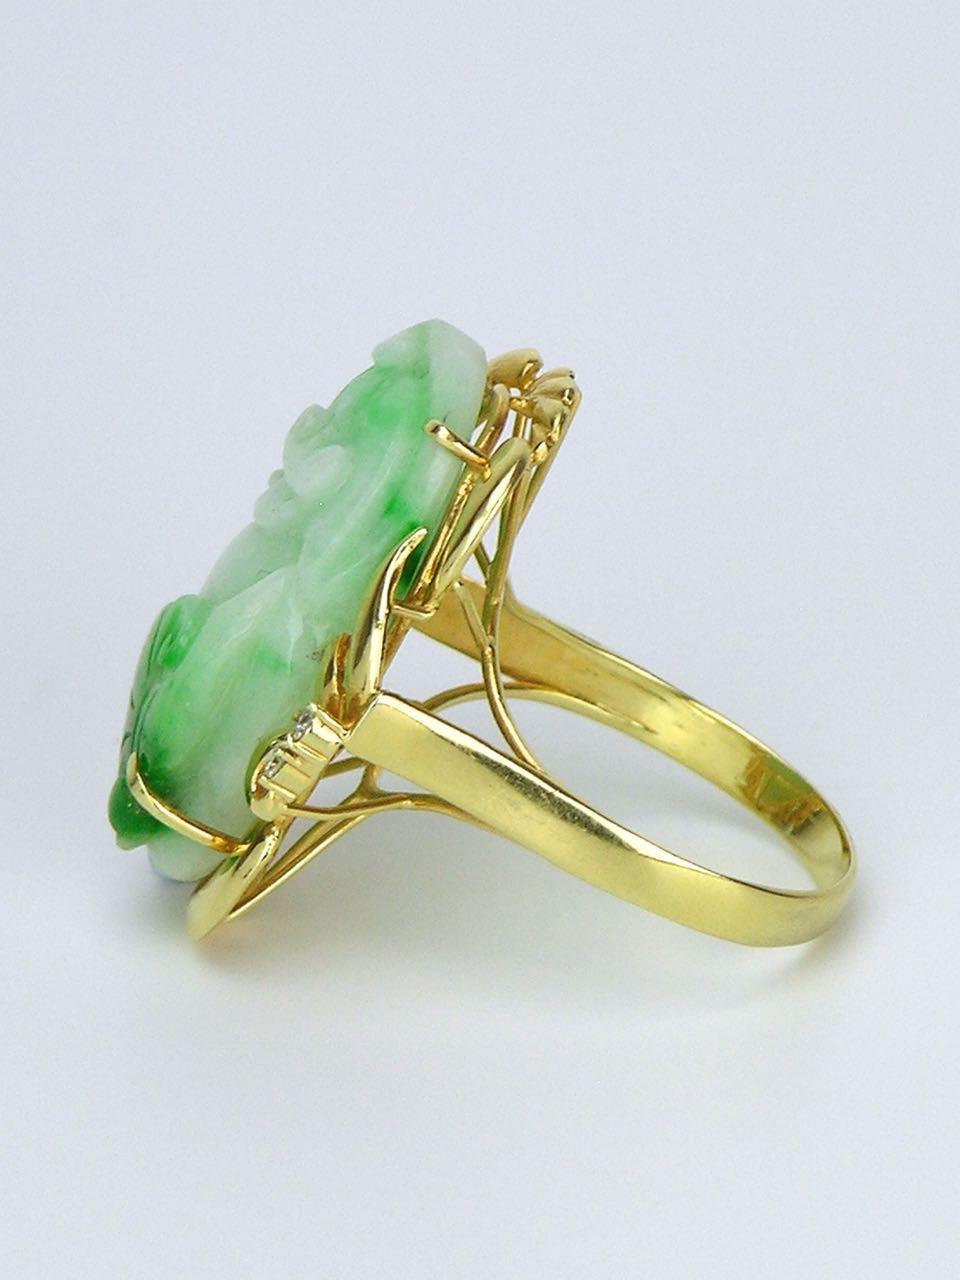 Vintage 14k Yellow Gold Carved Jade and Diamond Ring